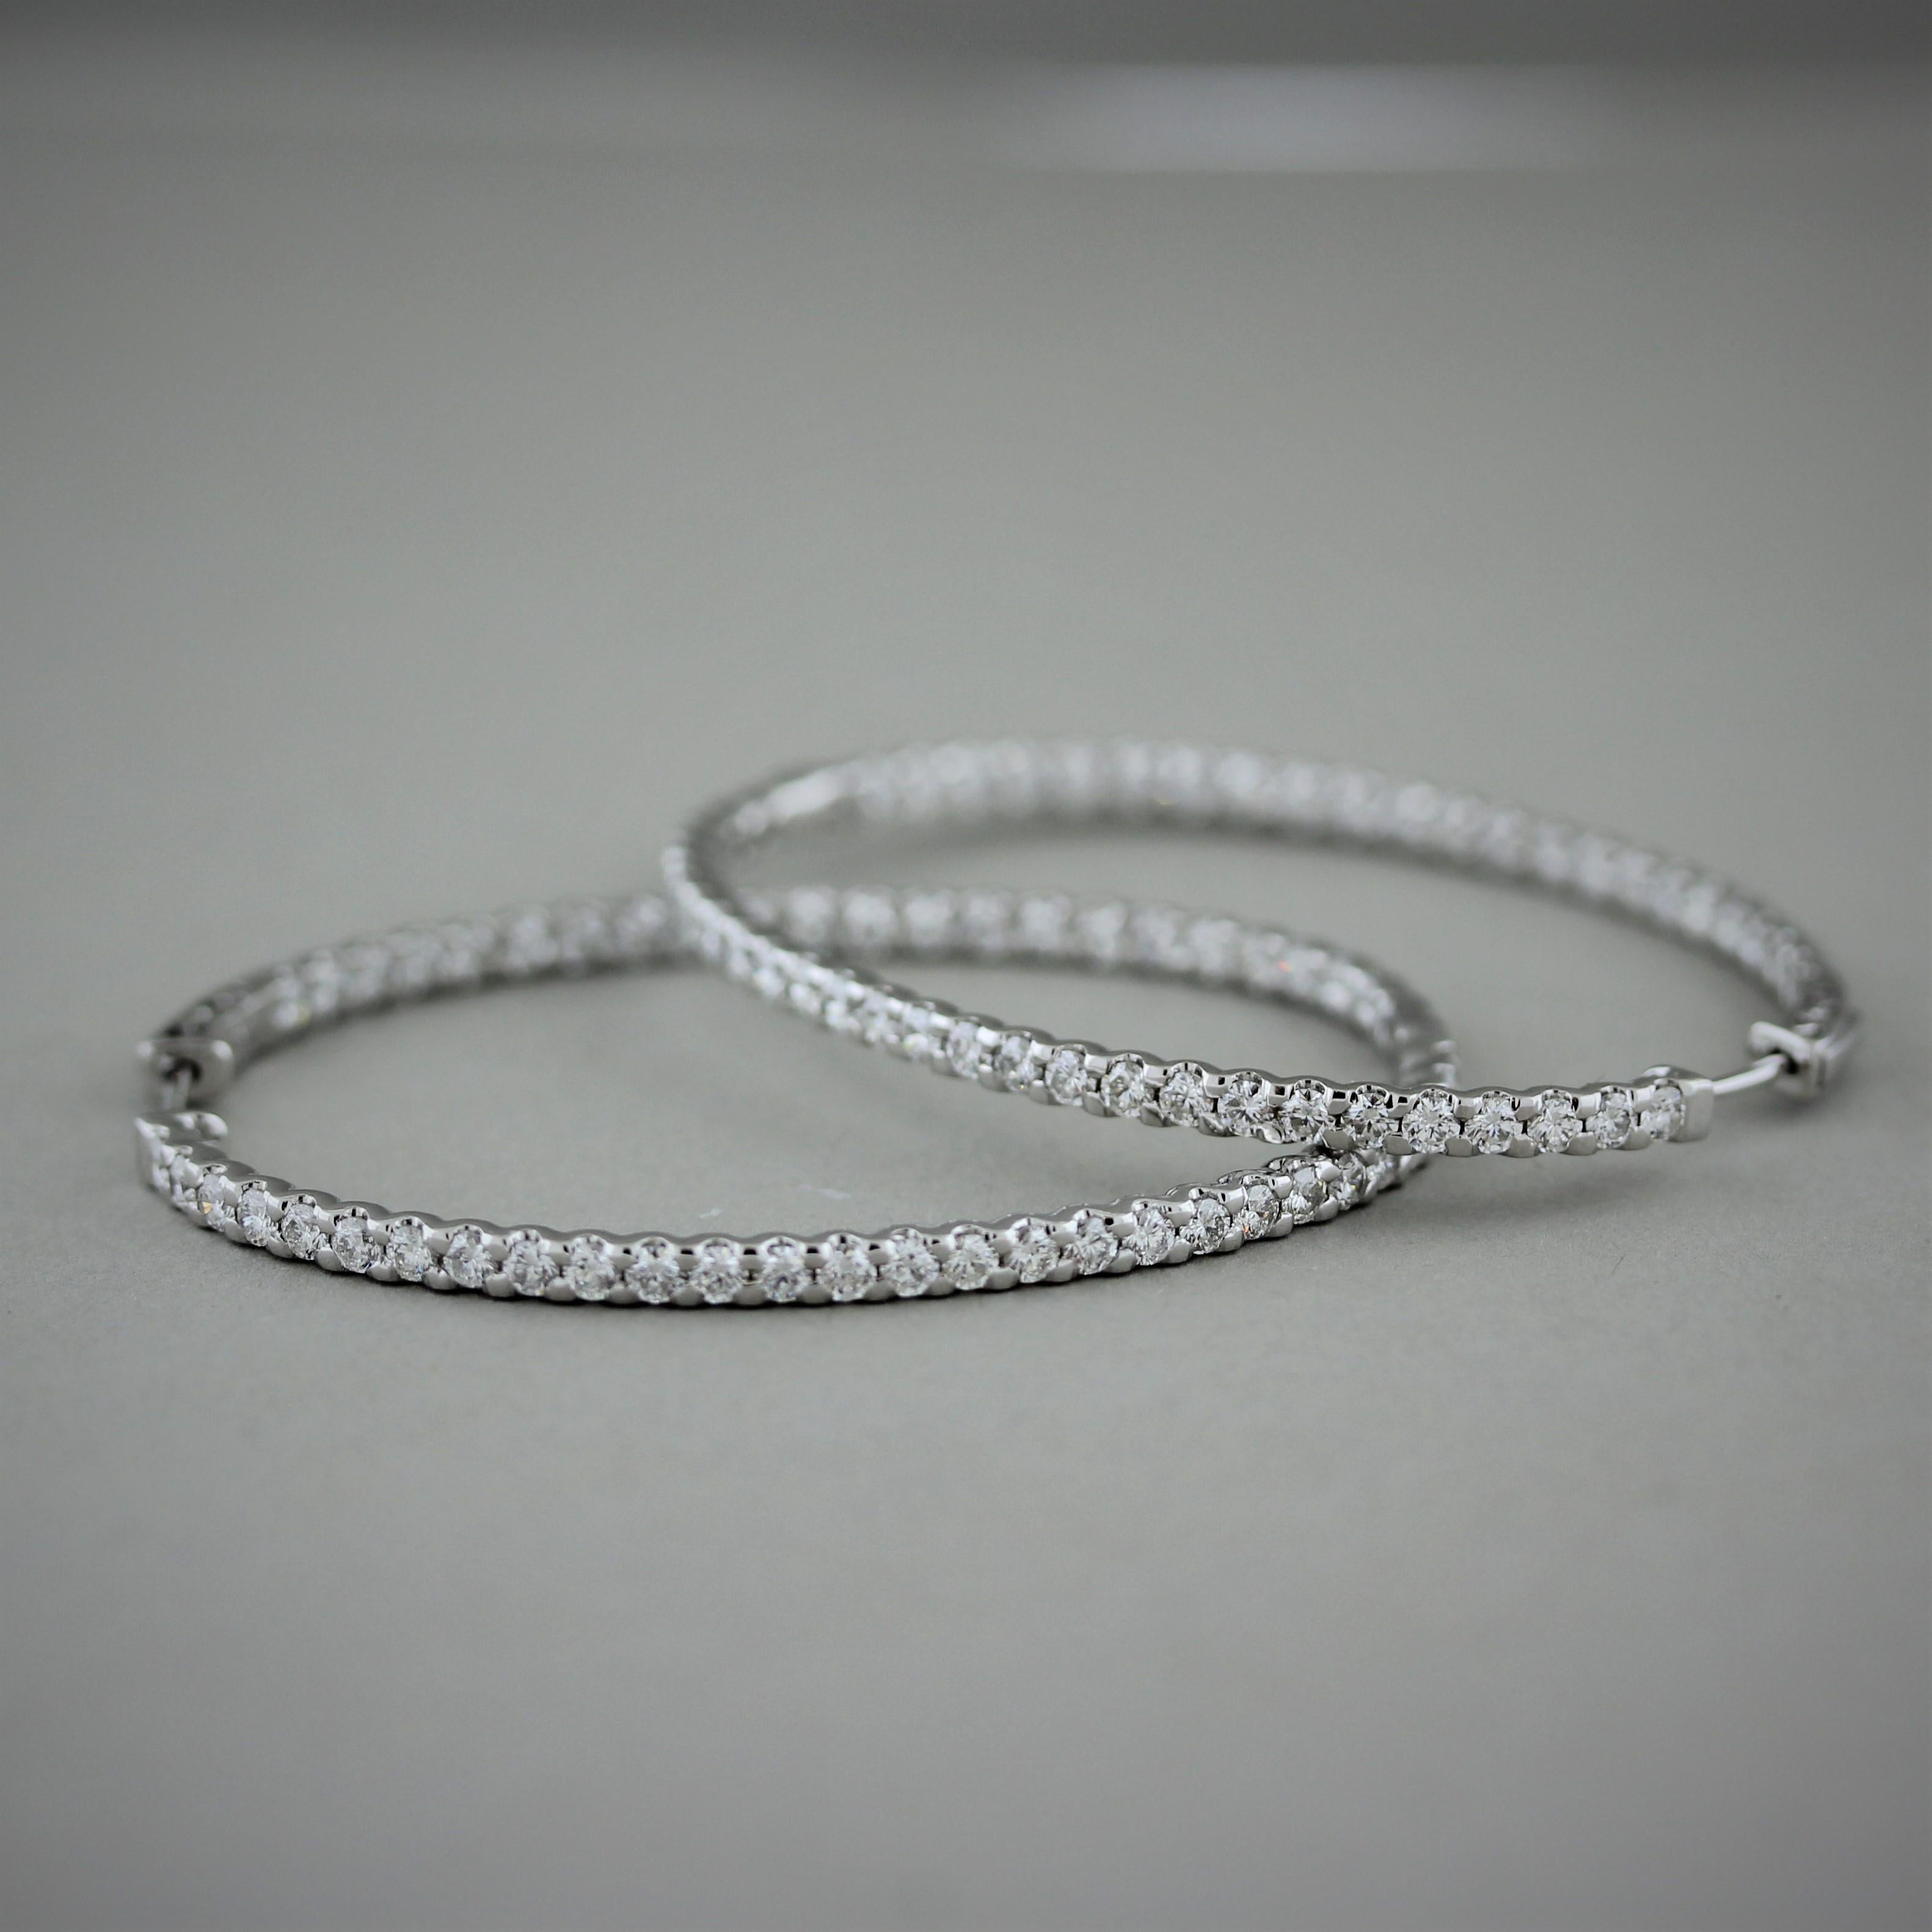 A long pair of hoop earrings in an oval shape. They feature 4.24 carats of round brilliant cut diamonds set in 14k whtie gold. A simple yet elegant pair of earrings that can be worn everyday.


Length: 1.95 inches


Width: 1.5 inches
